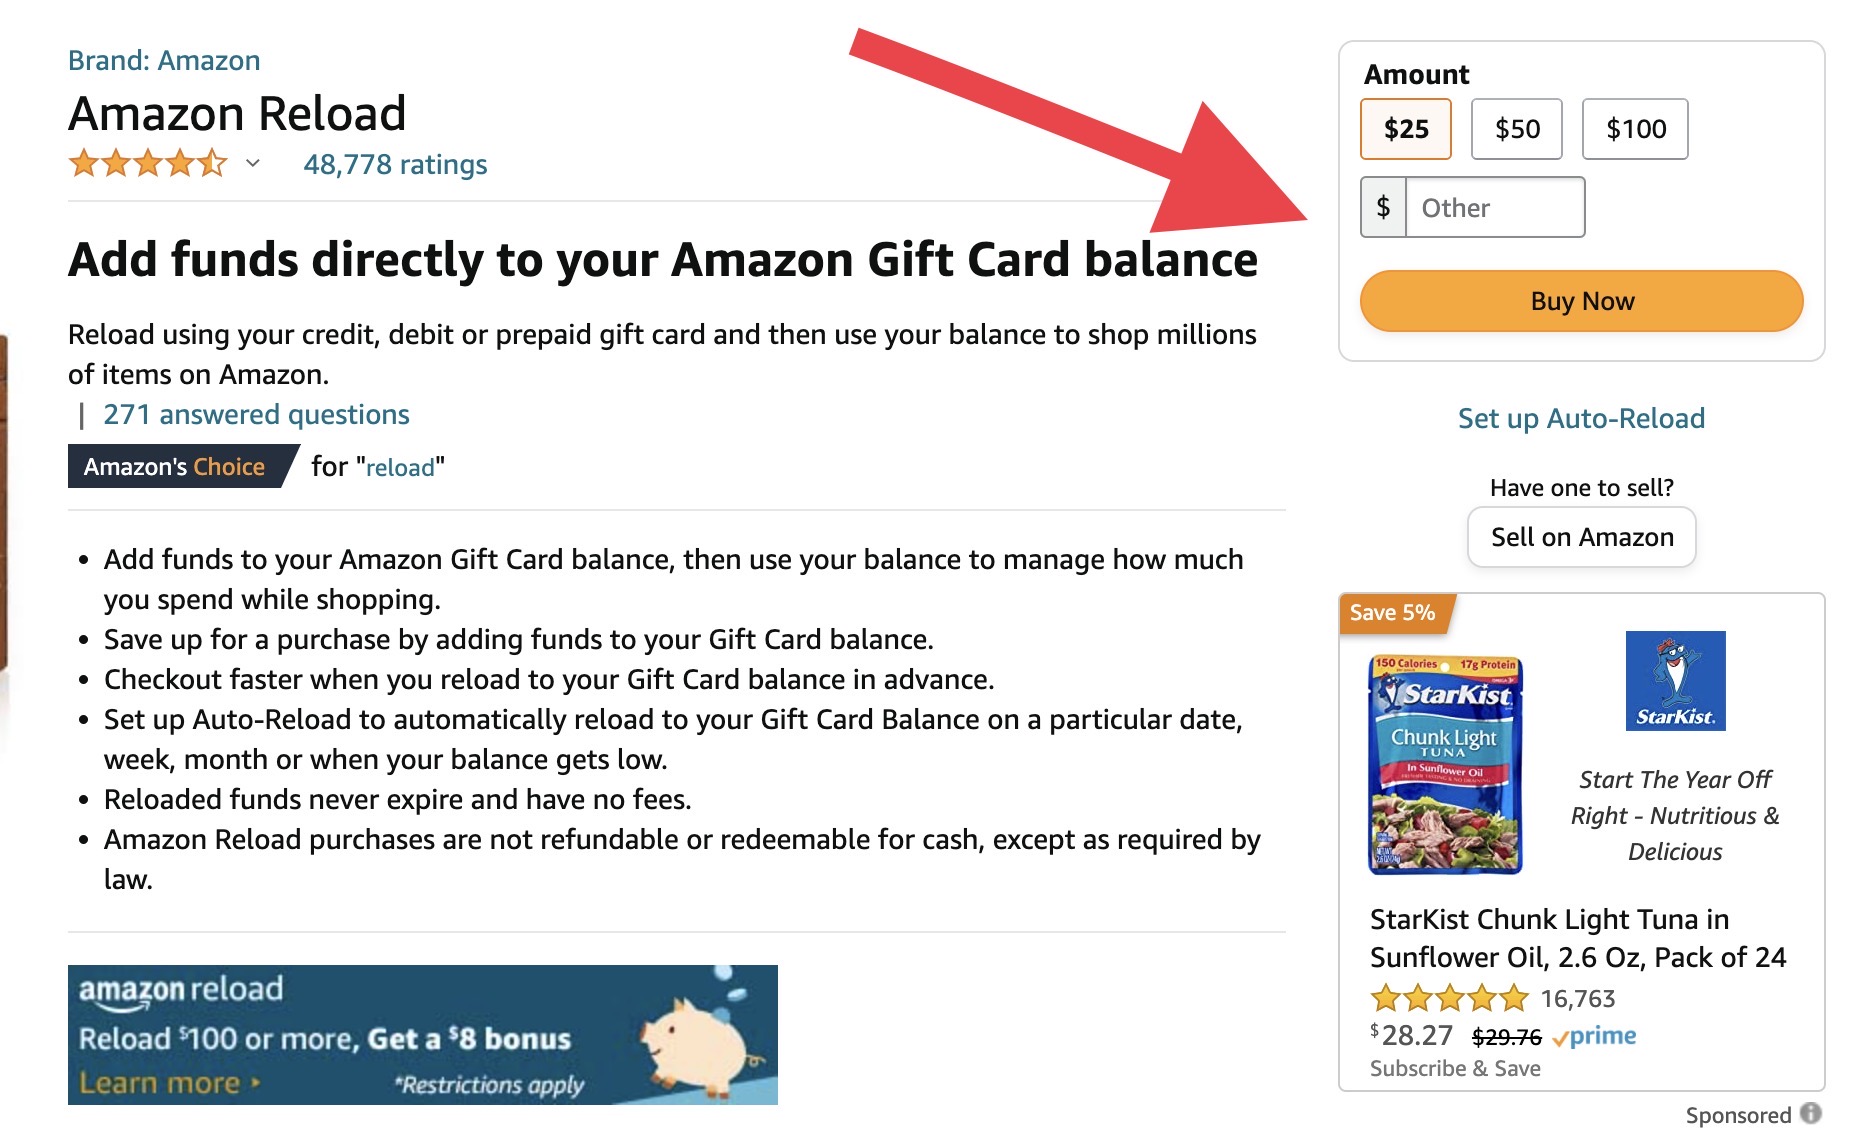 Are Visa Gift Cards Accepted on Amazon?